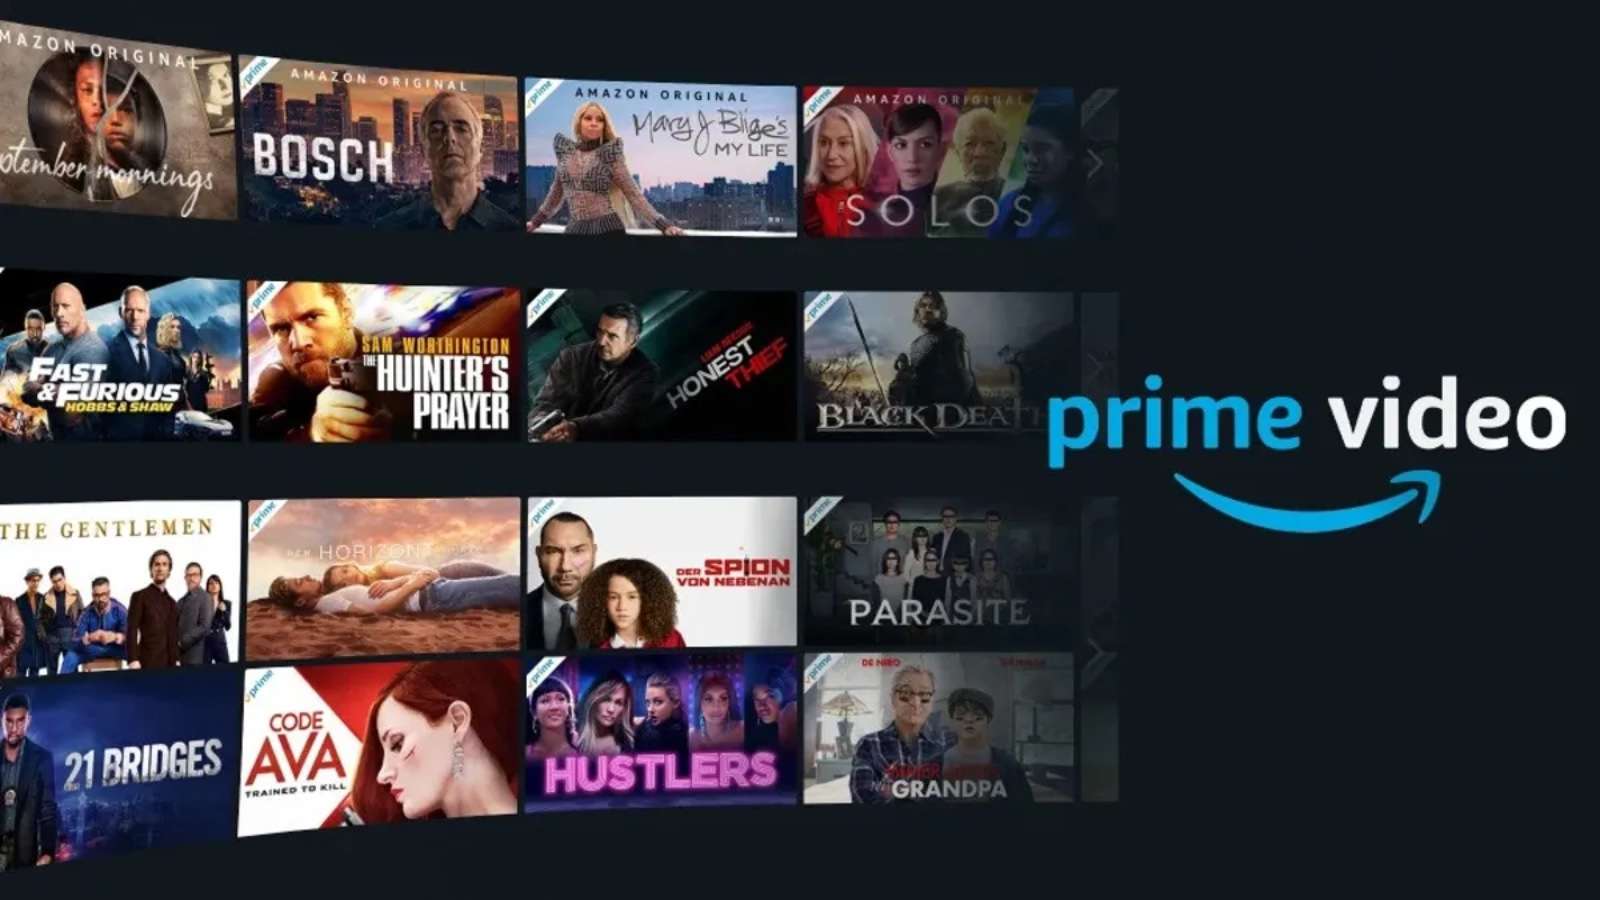 Amazon Prime Video shows and movies.